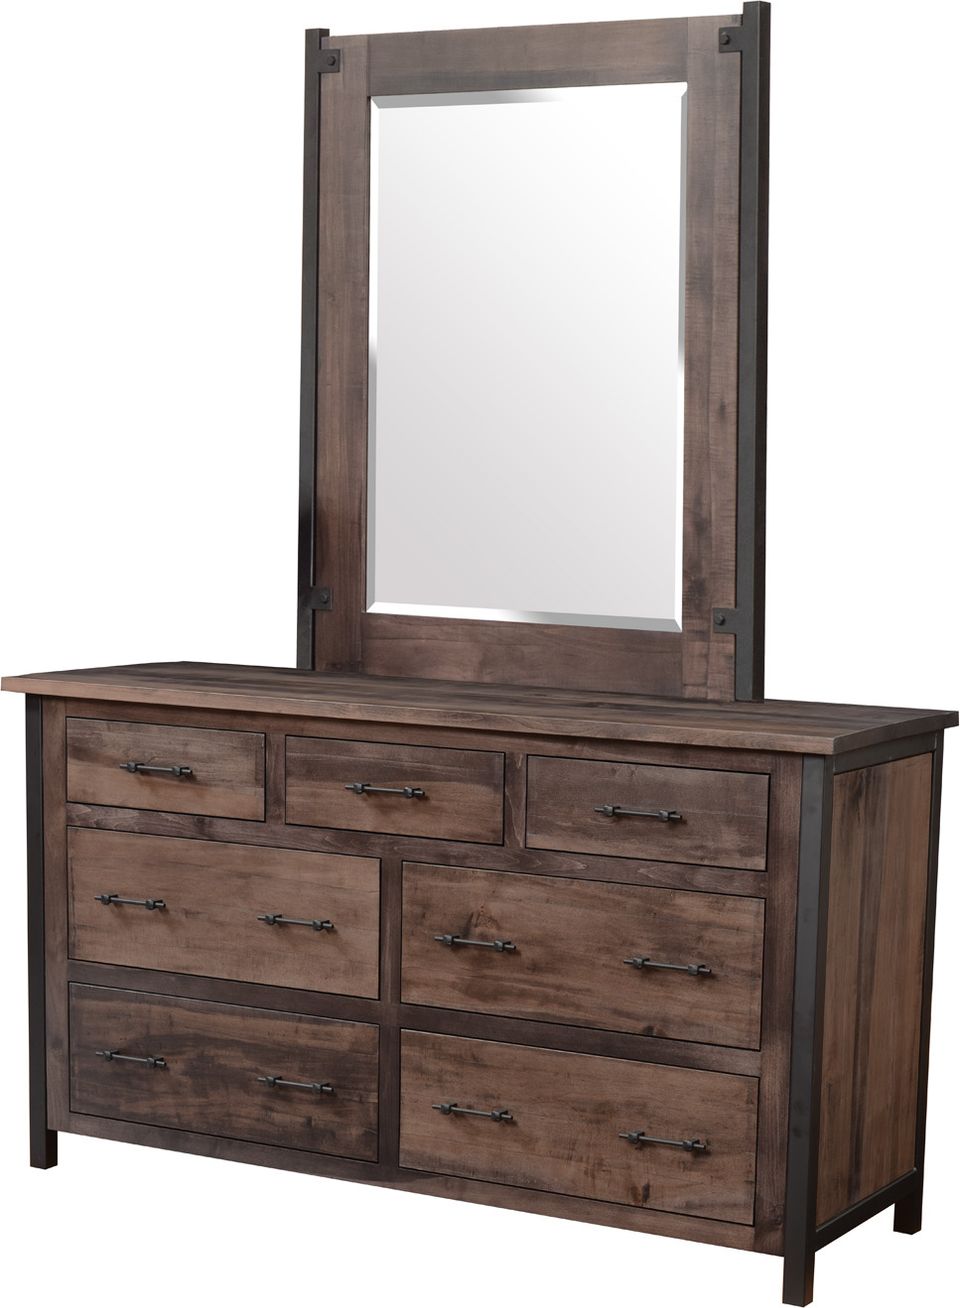 Mbed structura collection dresser with mirror